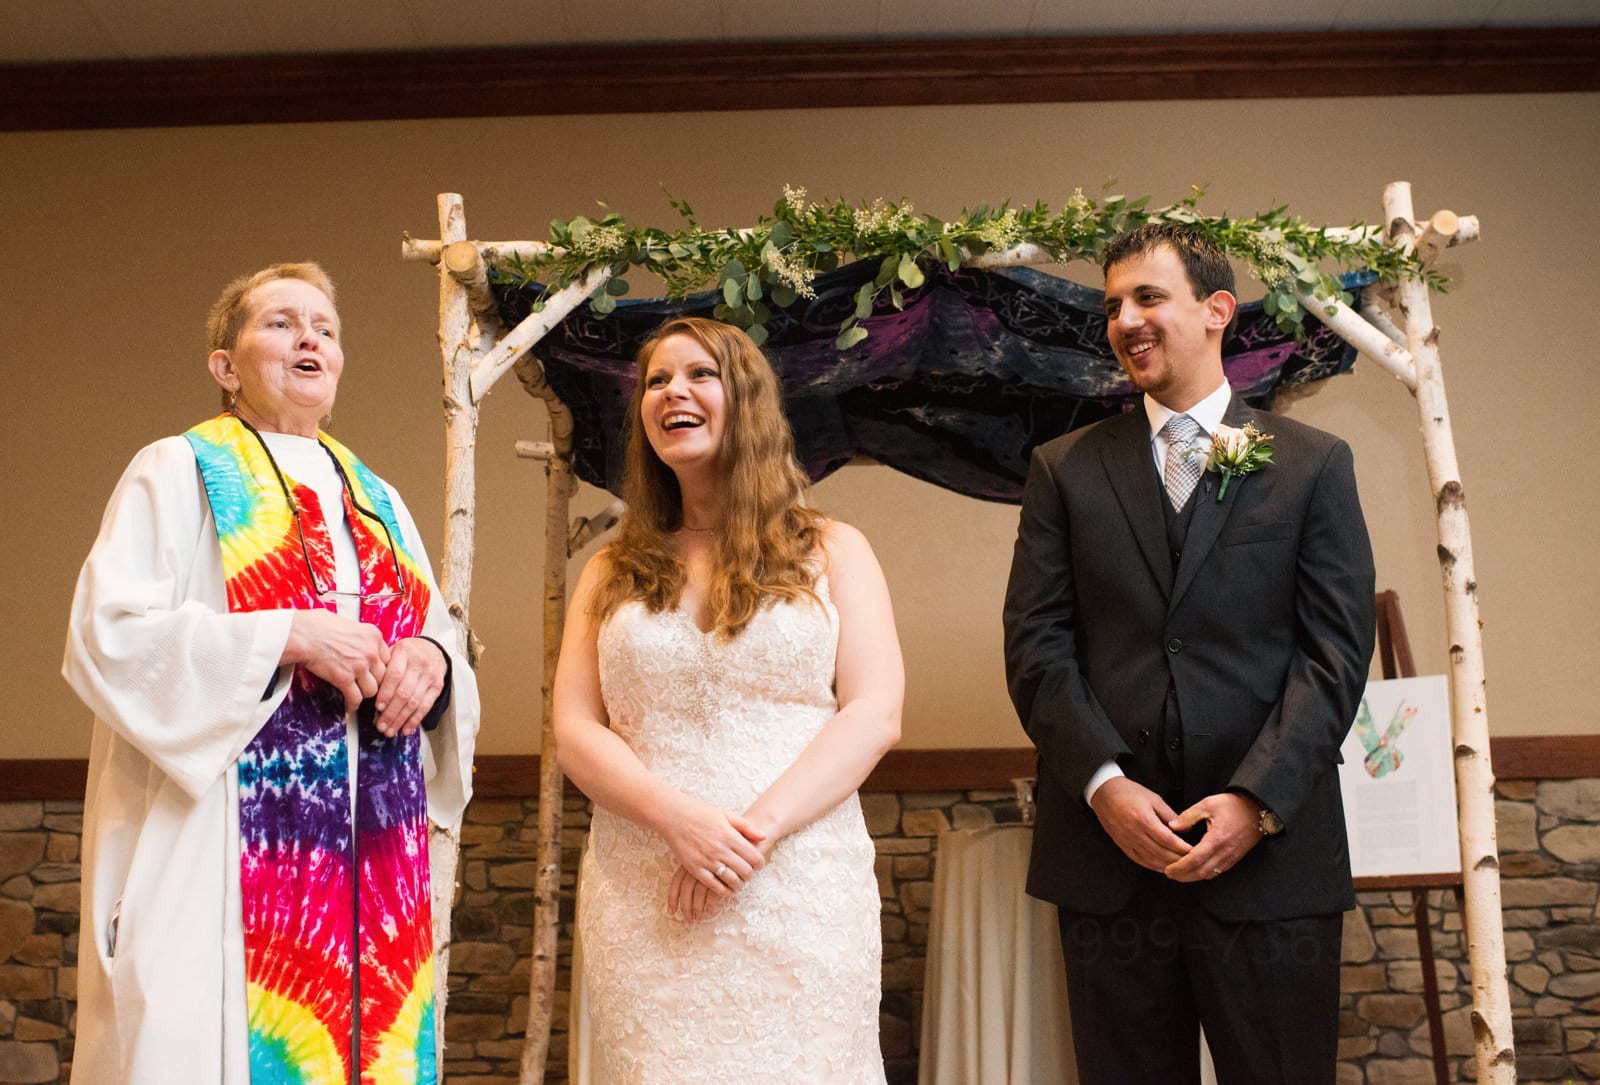 A female pastor wearing a tie dyed sash speaks as the bride and groom standing next to her smile during their Fall Wedding at Seven Springs.